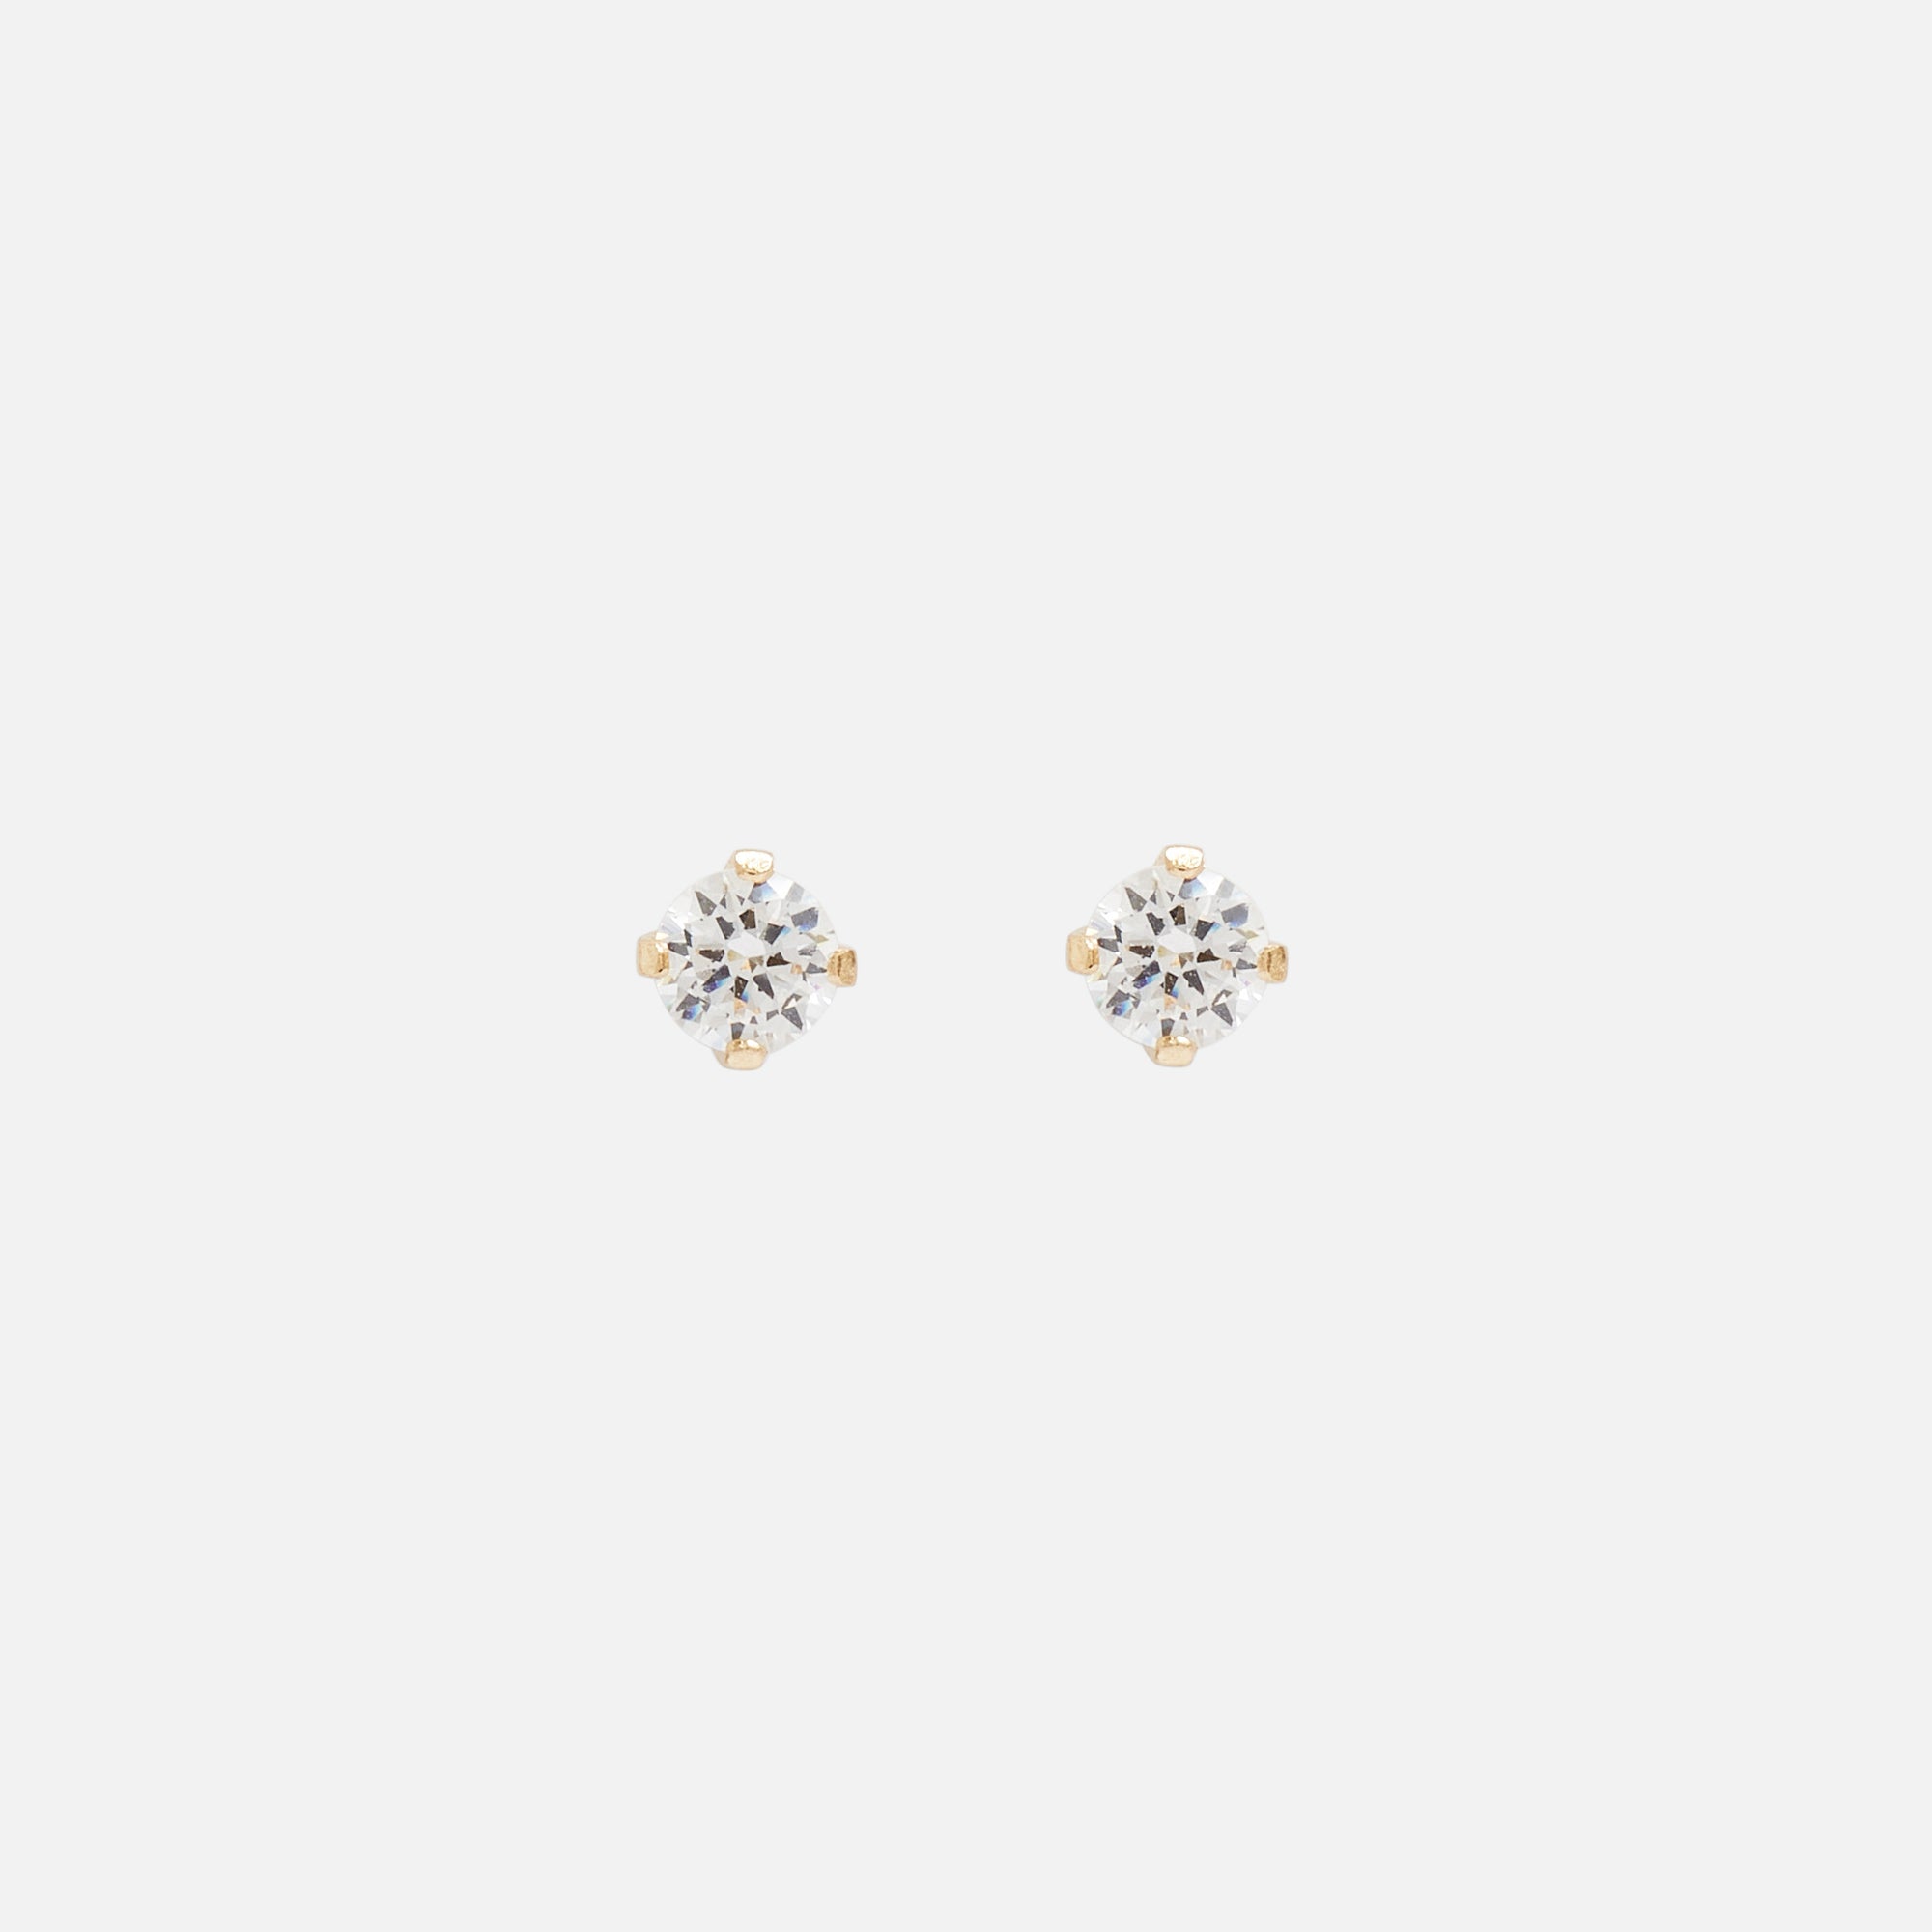 4 mm 10k yellow gold earrings with cubic zirconia